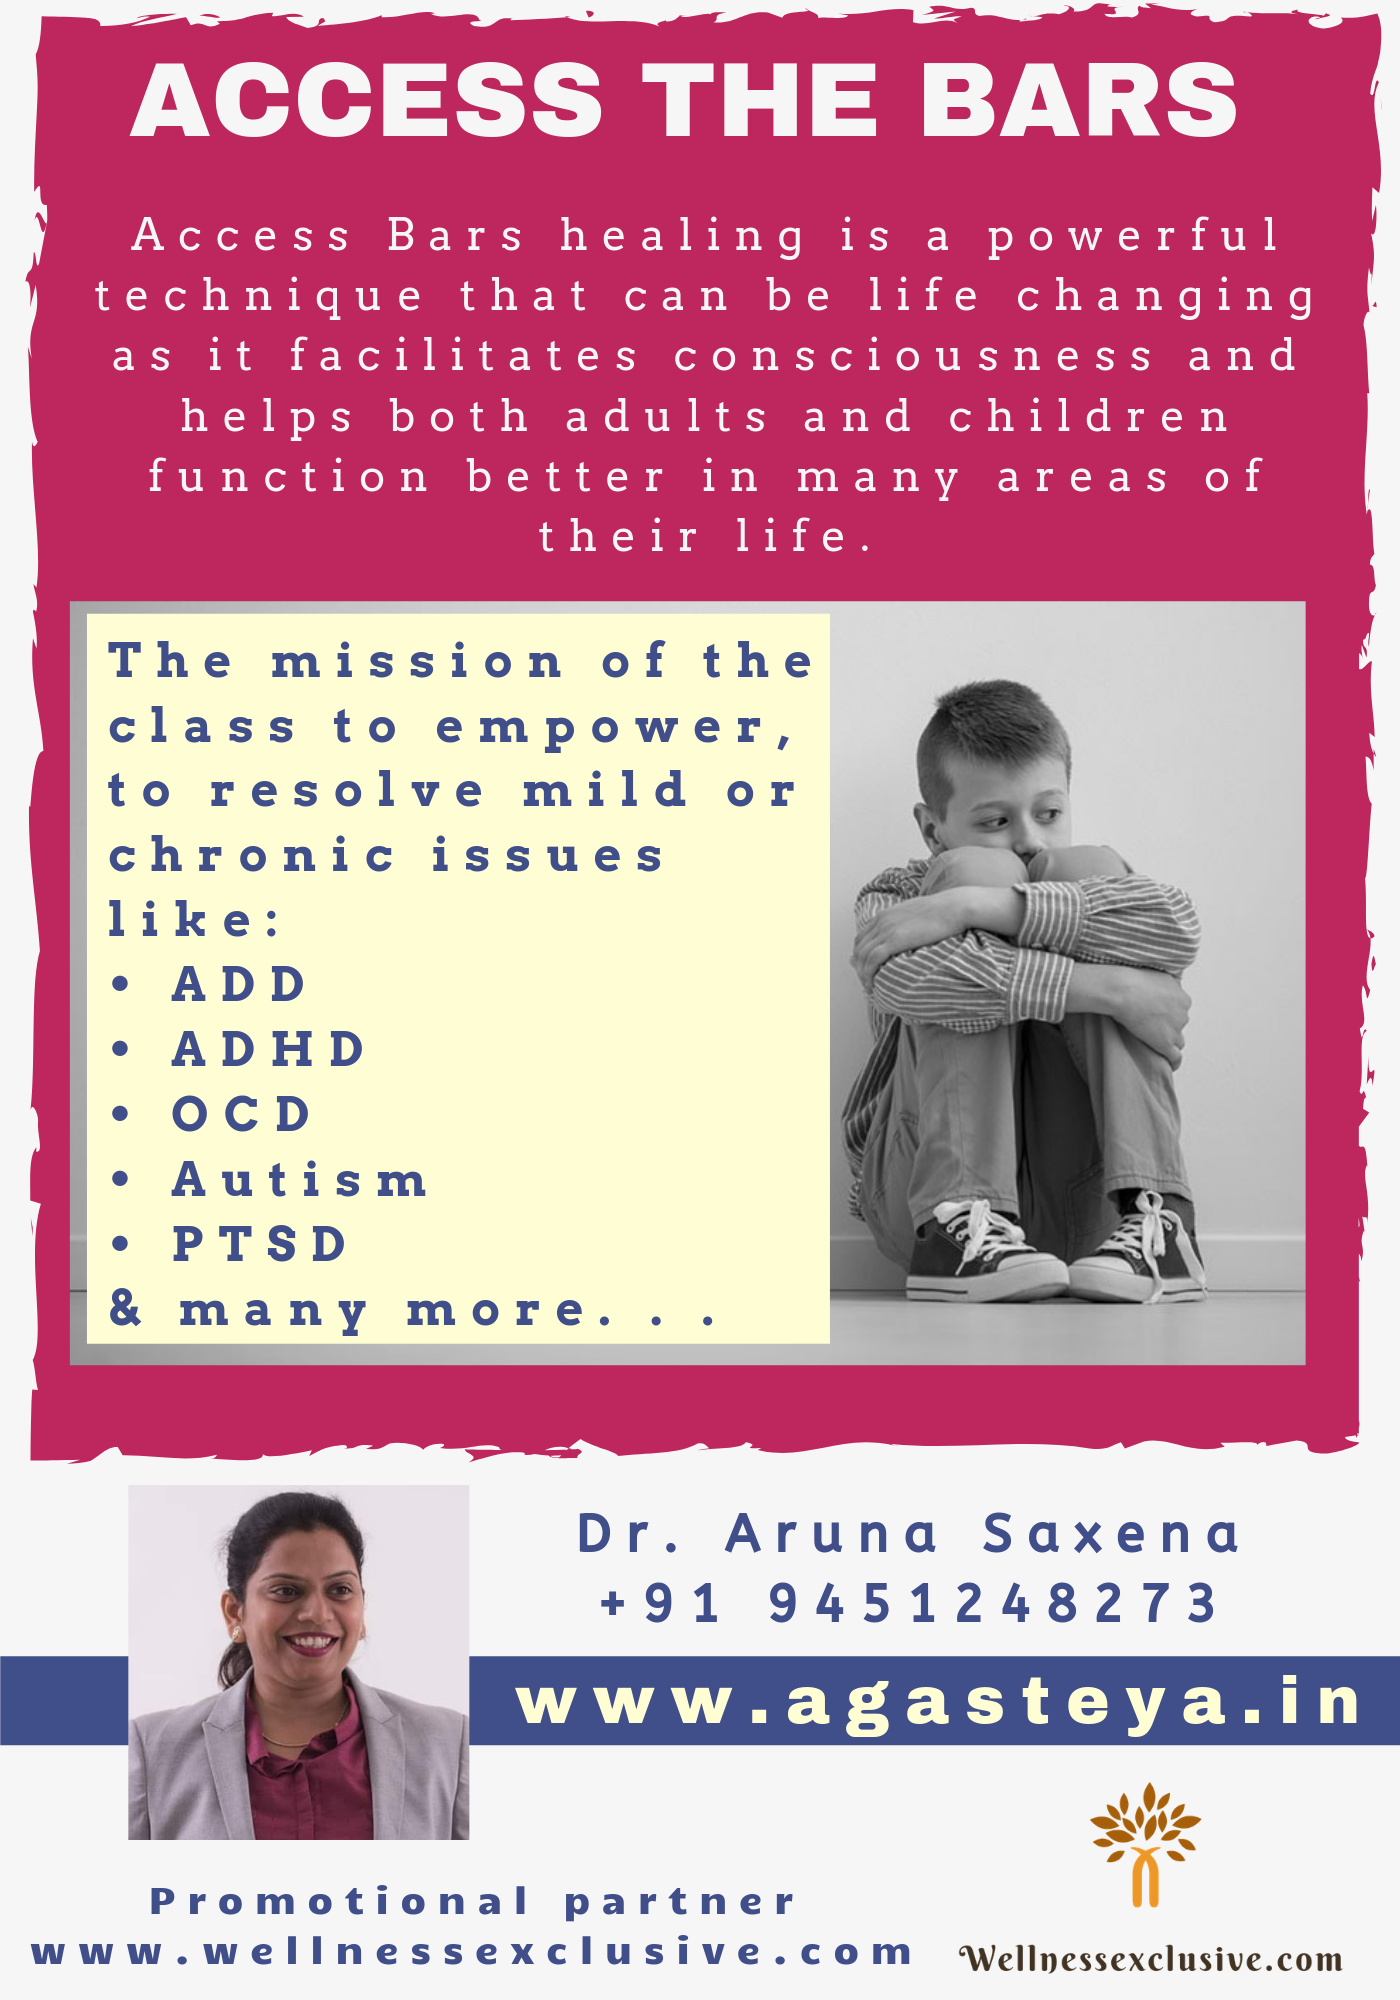 Access Bars Class for ADHD, ADD, OCD, Autism, PCD by Dr. Aruna Saxena - Jammu